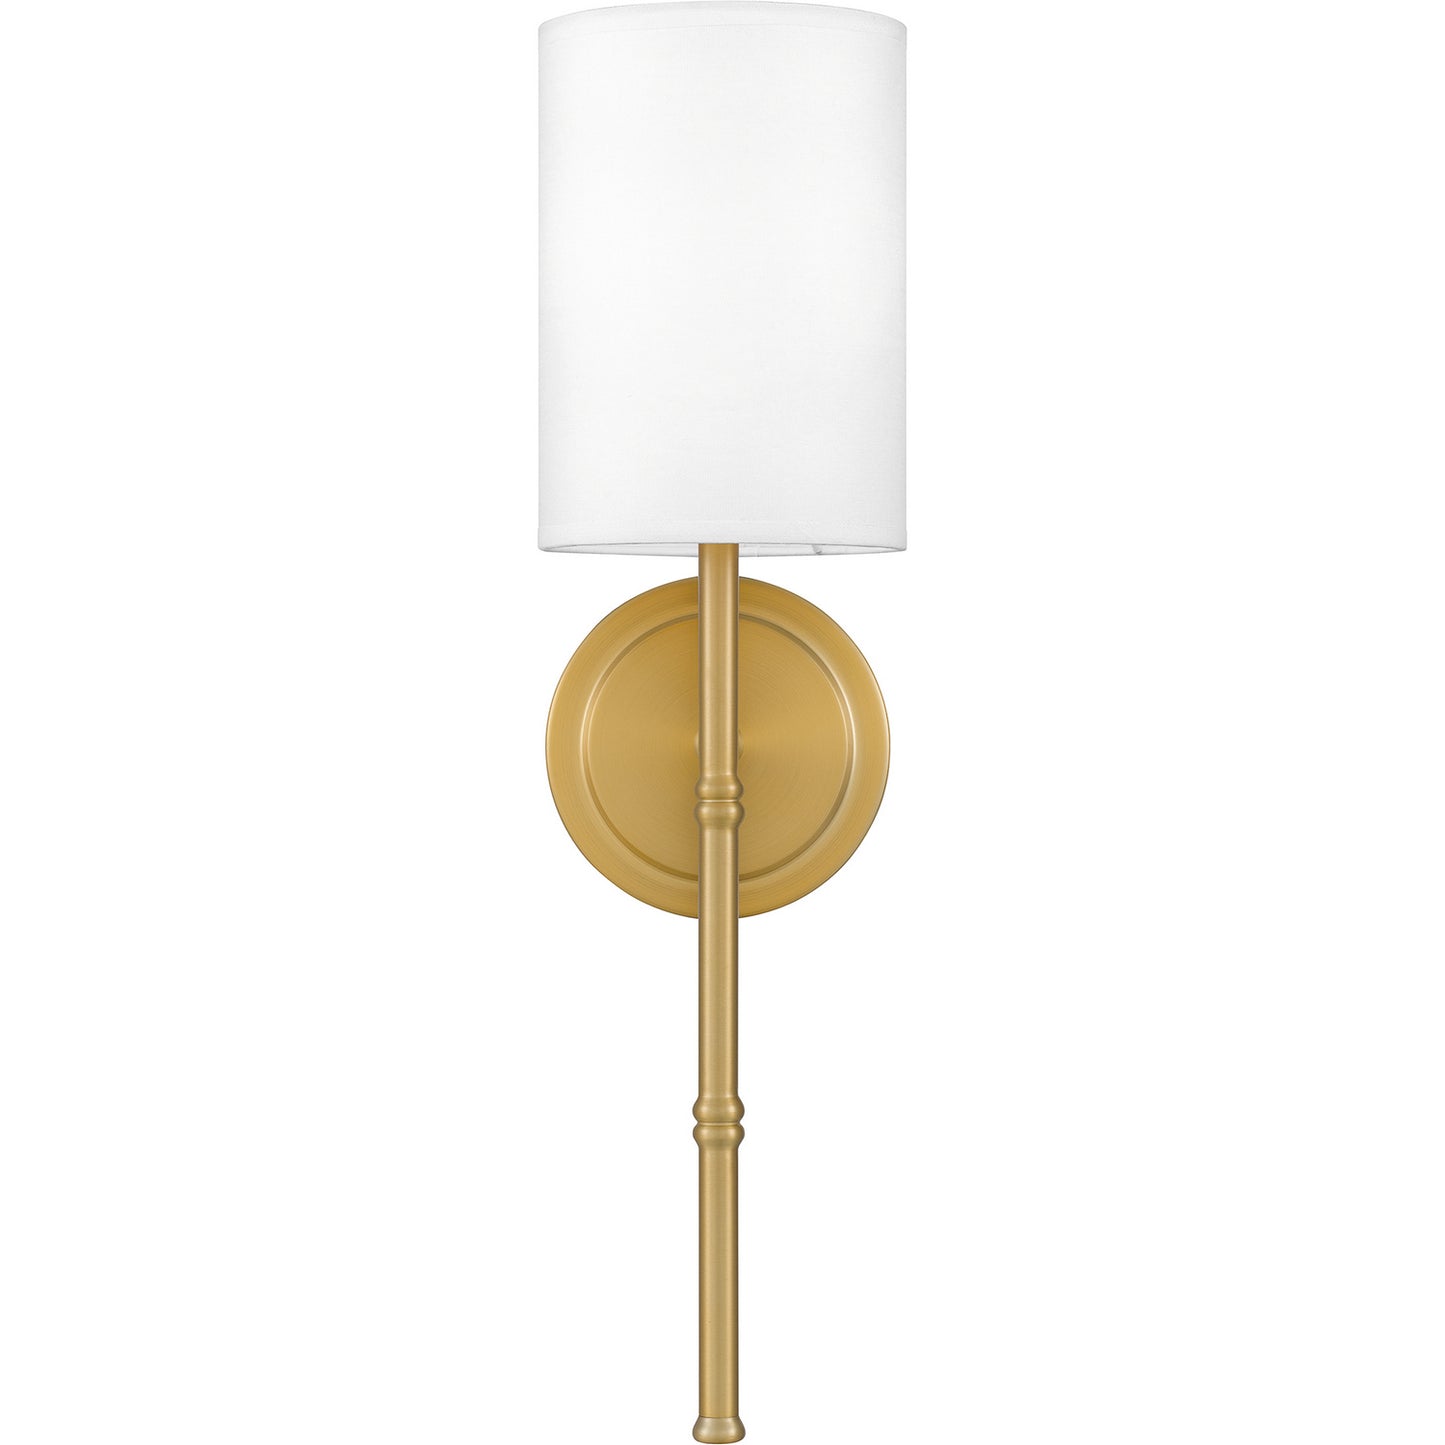 Quoizel Wood One Light Wall Sconce by Quoizel in Aged Brass Finish (QW16126AB)